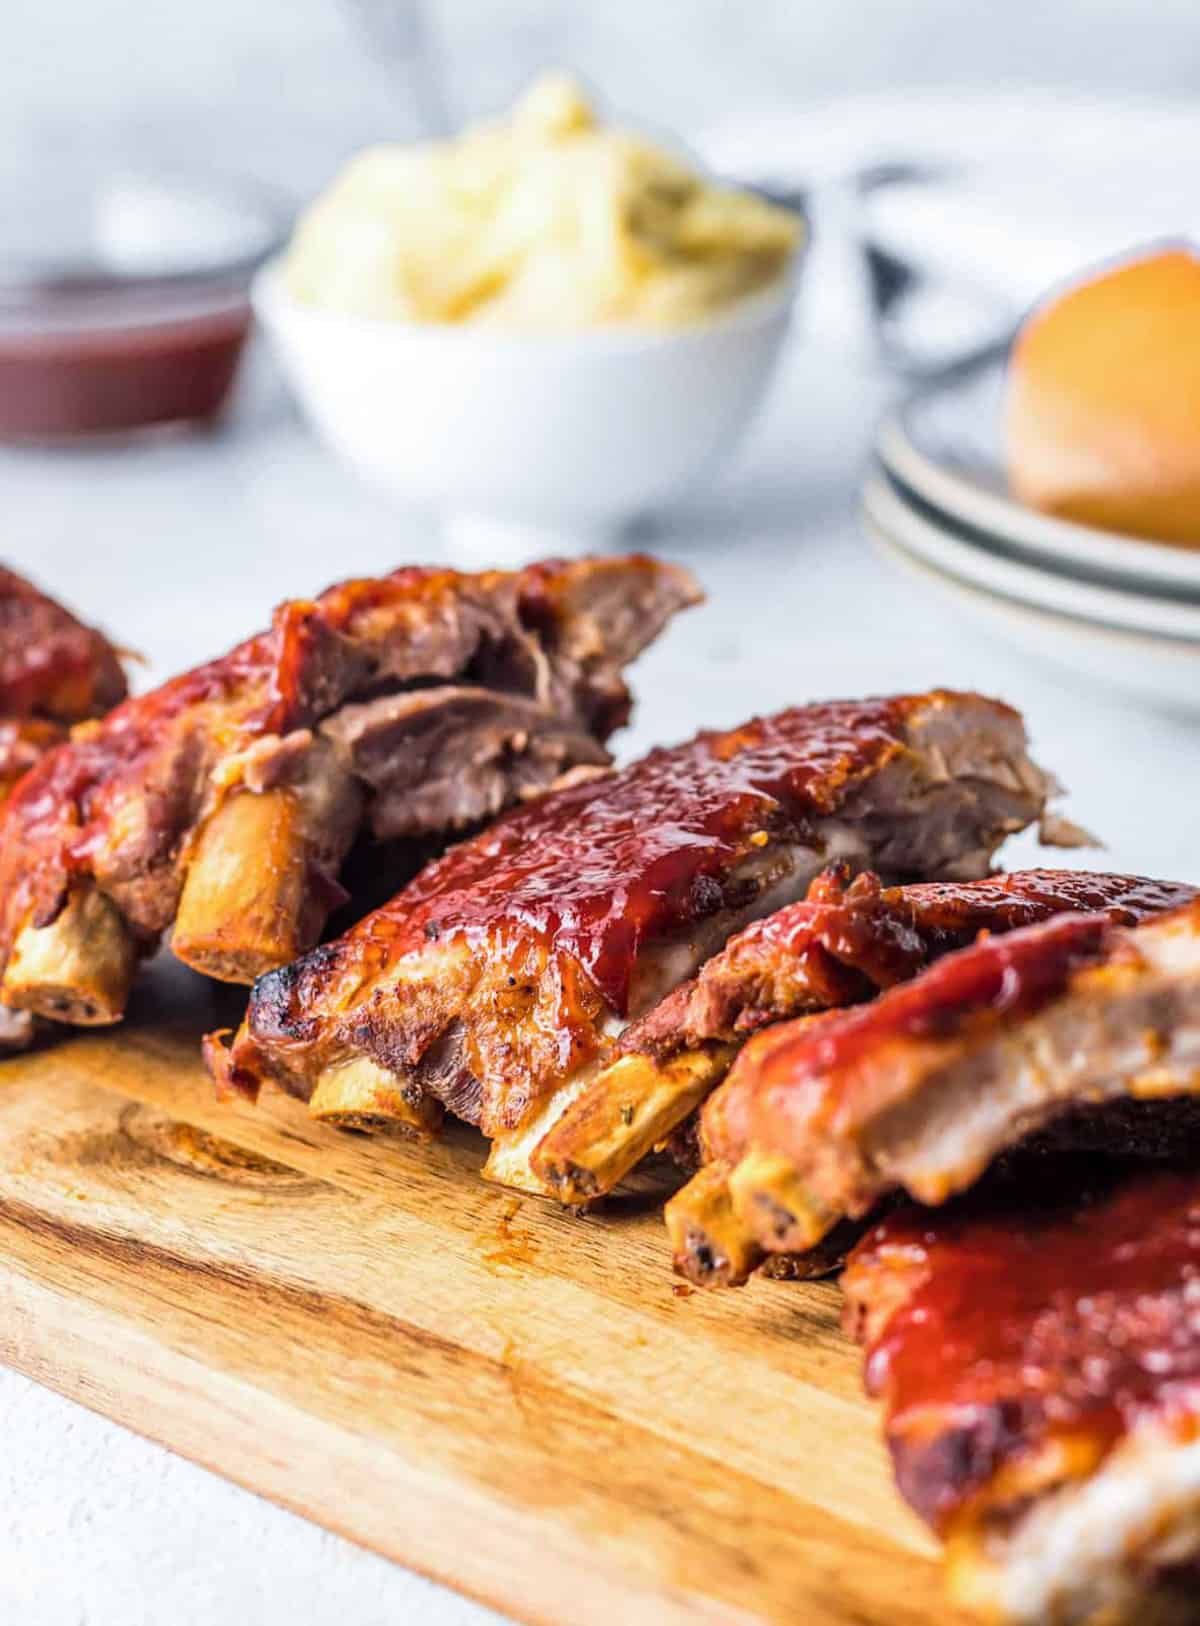 Sliced Instant Pot BBQ Ribs on wooden board with side dishes in background.